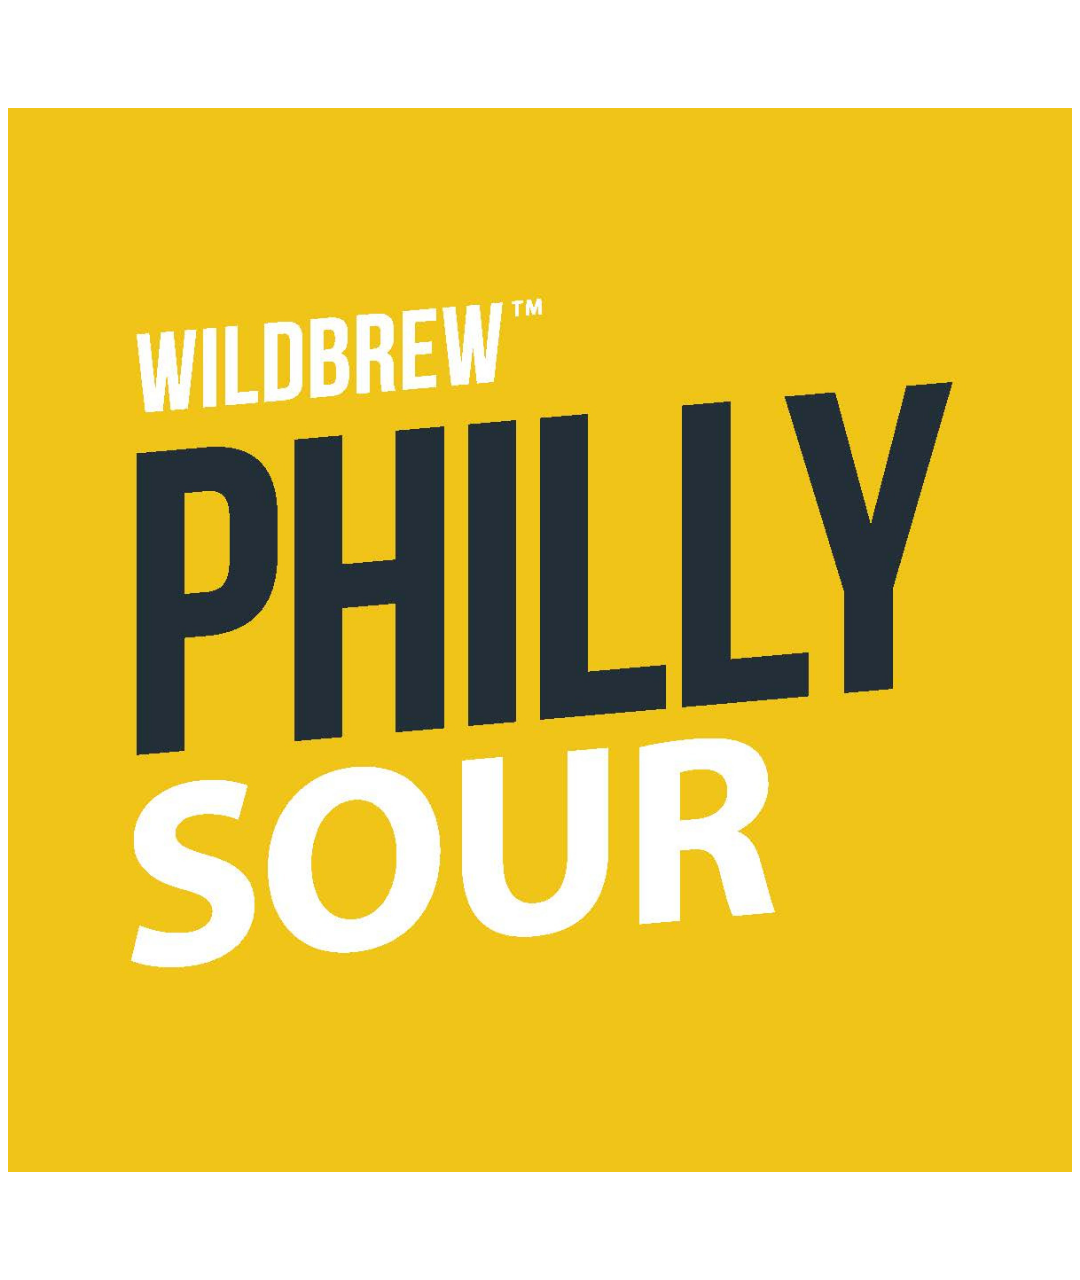 Philly sour